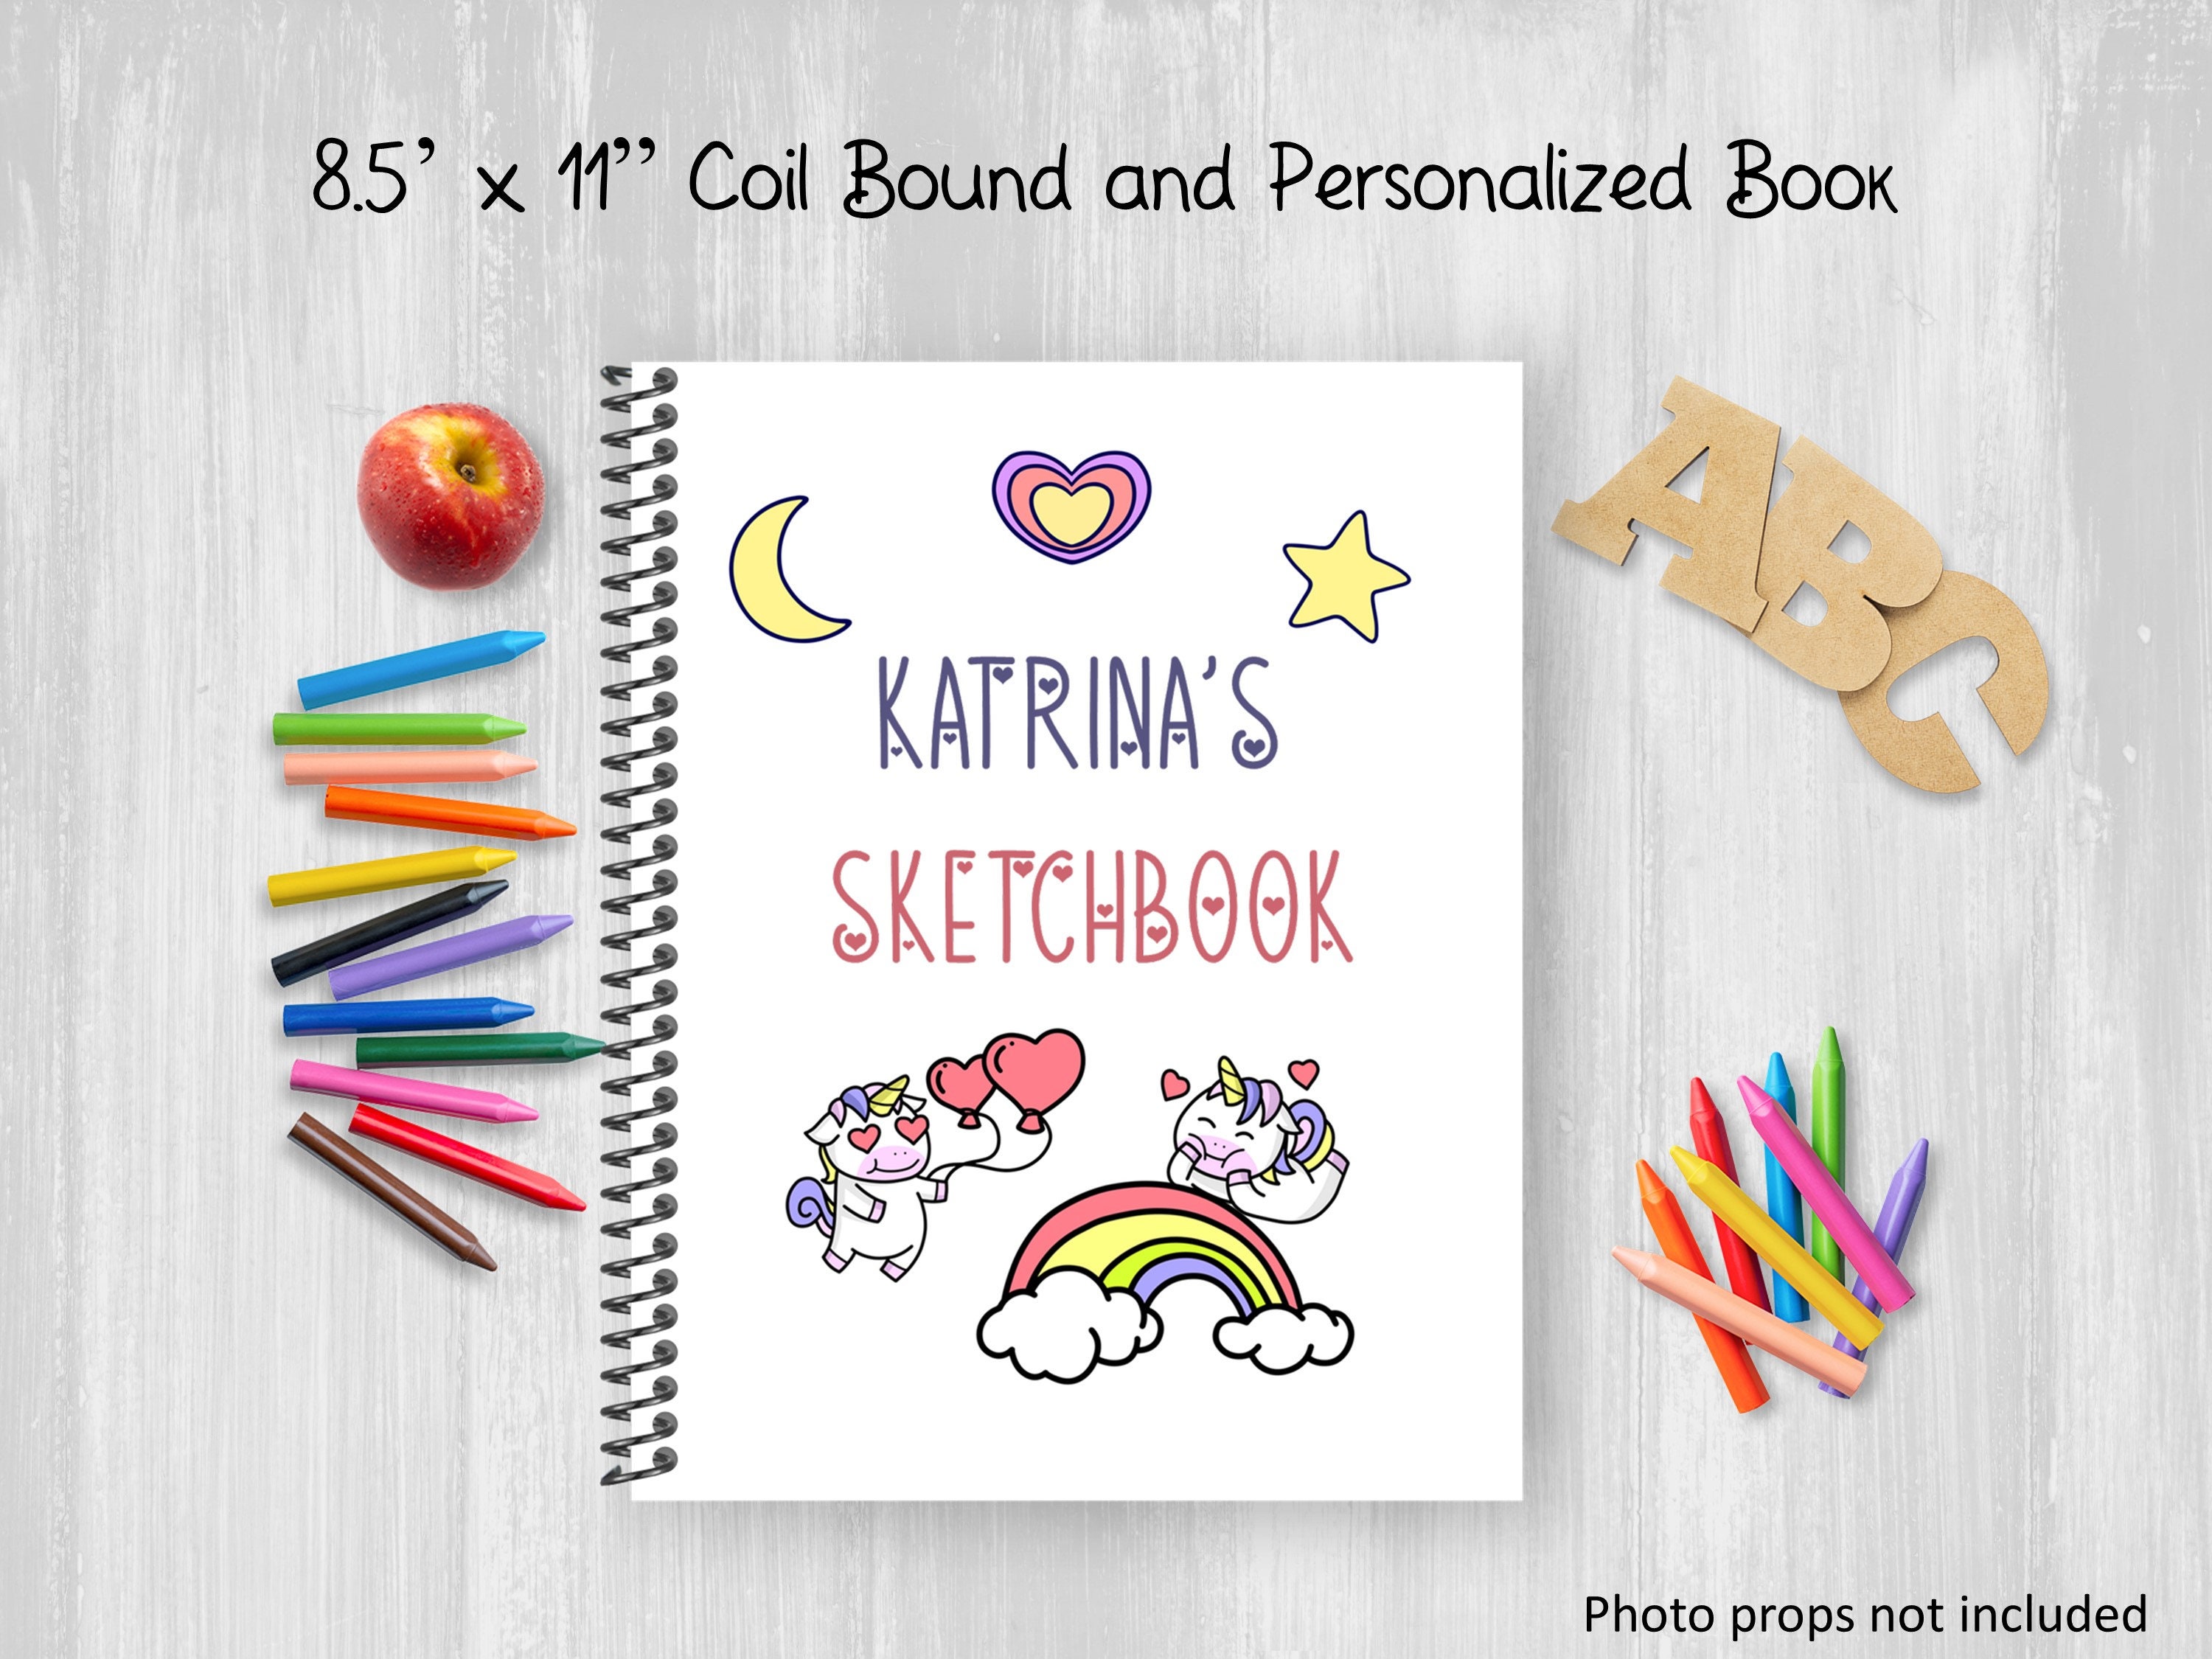 Sketch book. Personalized Sketchbook. Pages 100, Size 8.5X11 Inches